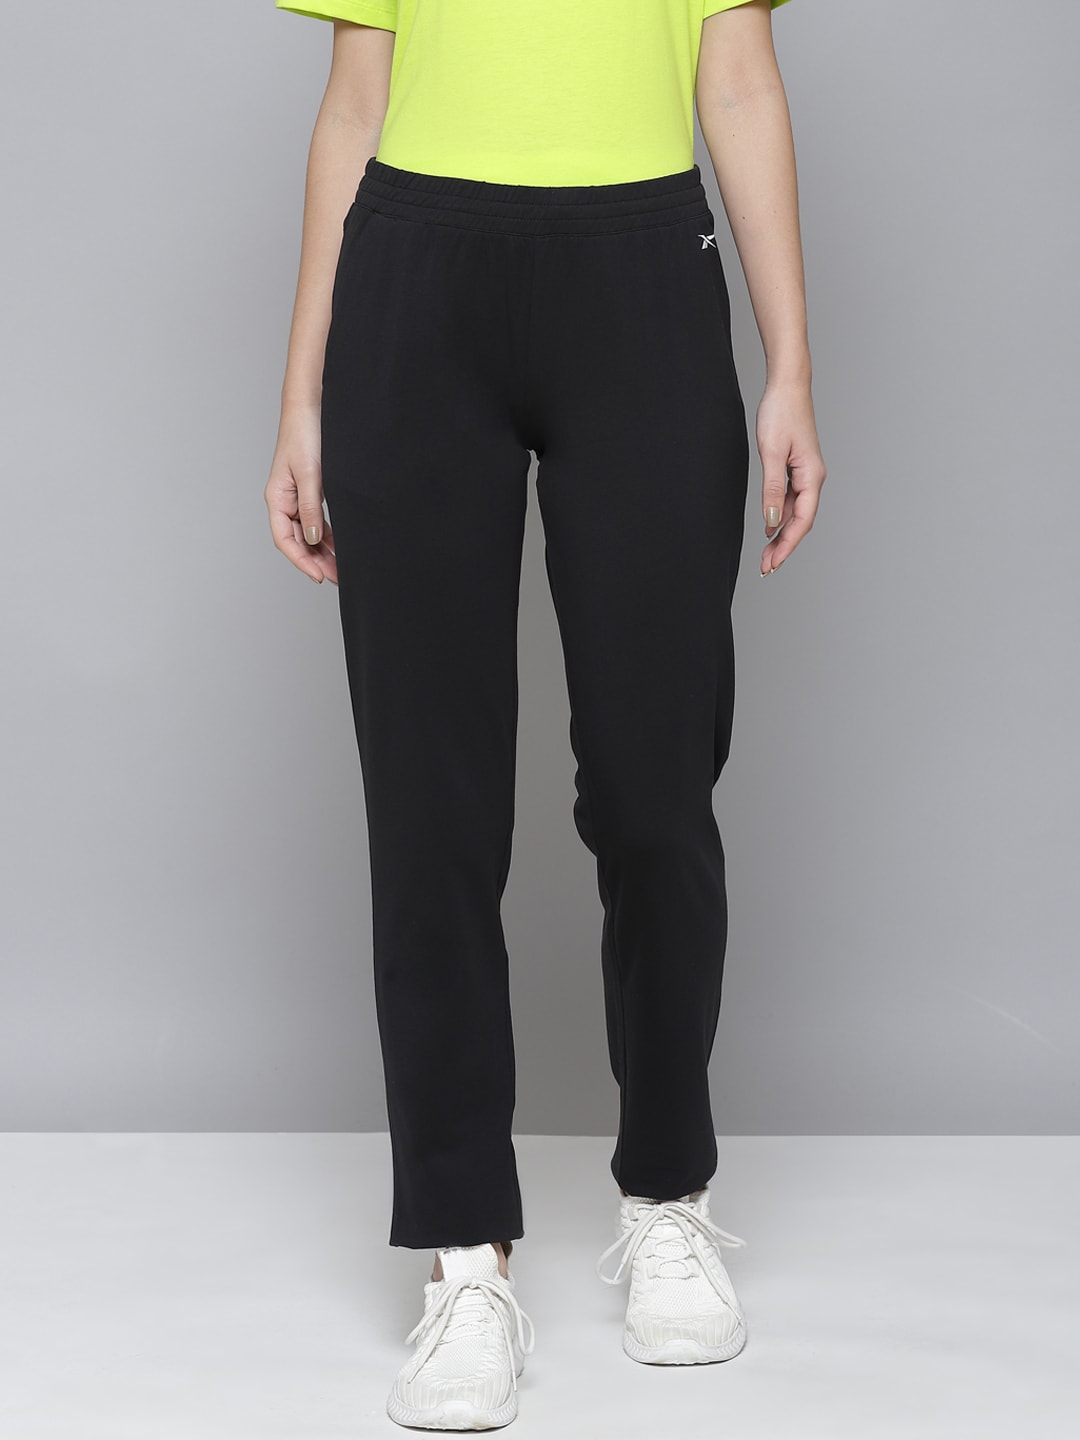 Reebok Women Black Foundation Solid Training Track Pants Price in India